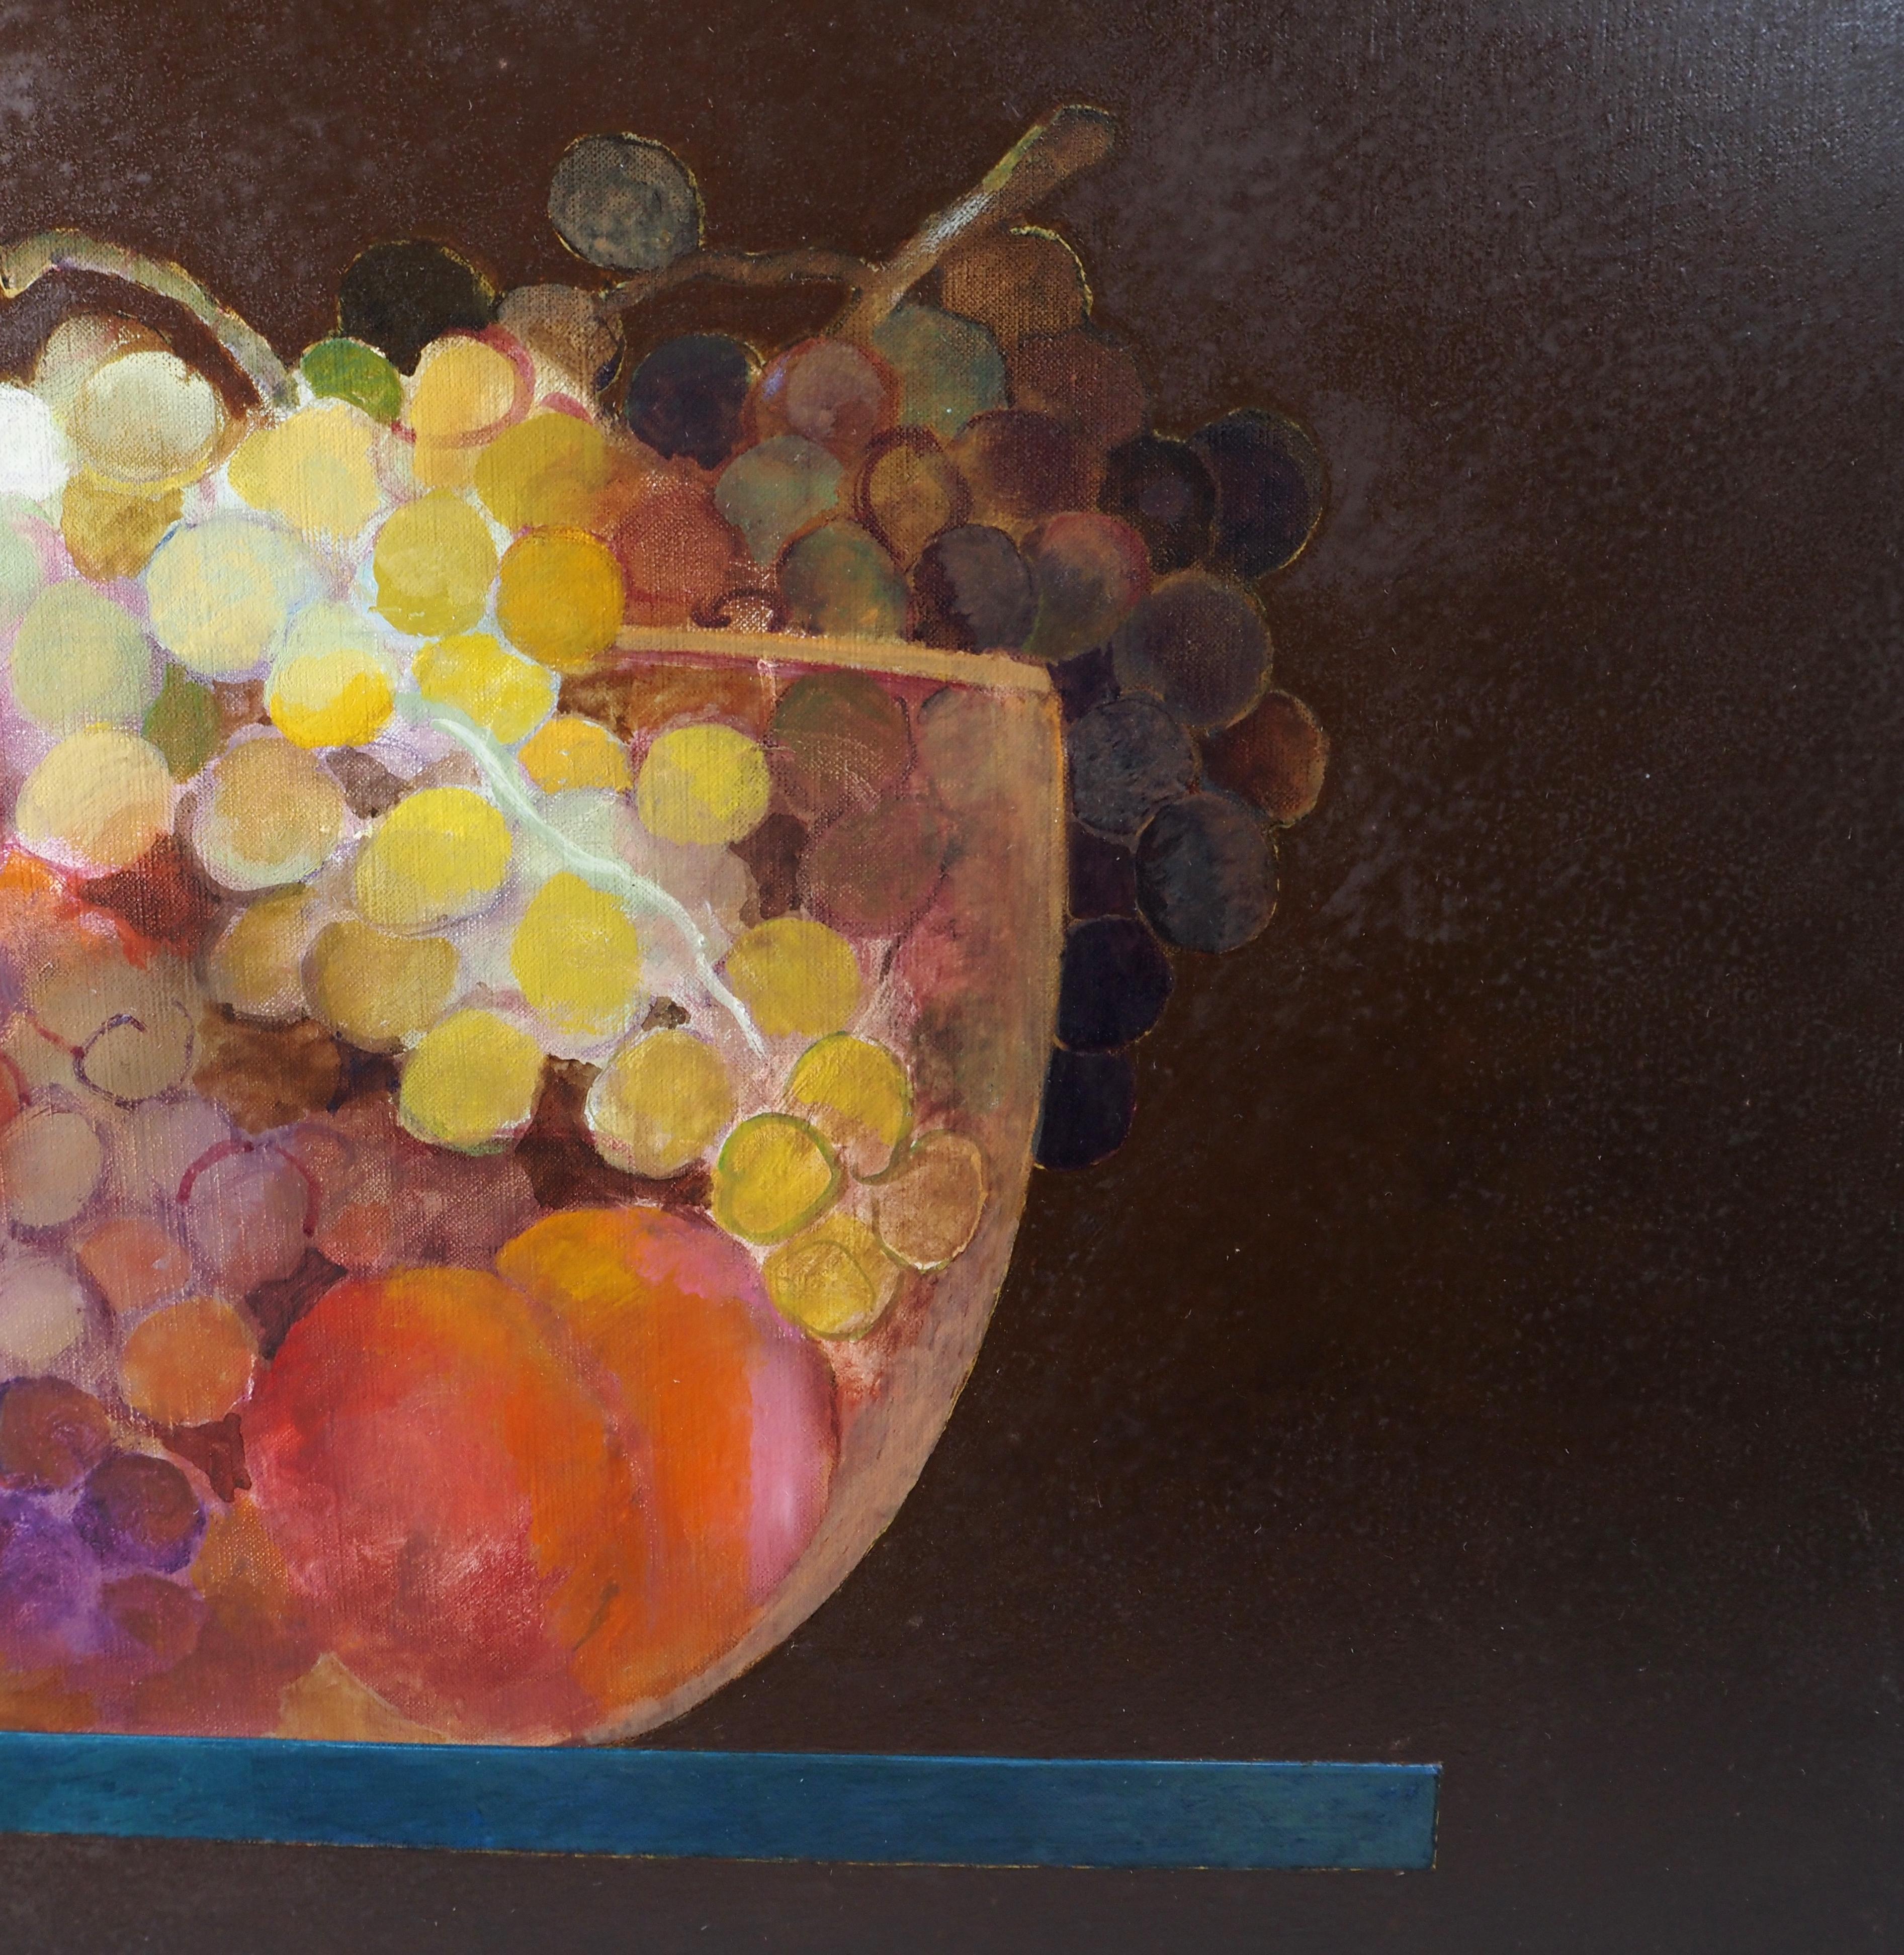 Portrait : Fruit and Mirror - Original oil on canvas, Signed  - Brown Figurative Painting by Pierre Garcia Fons